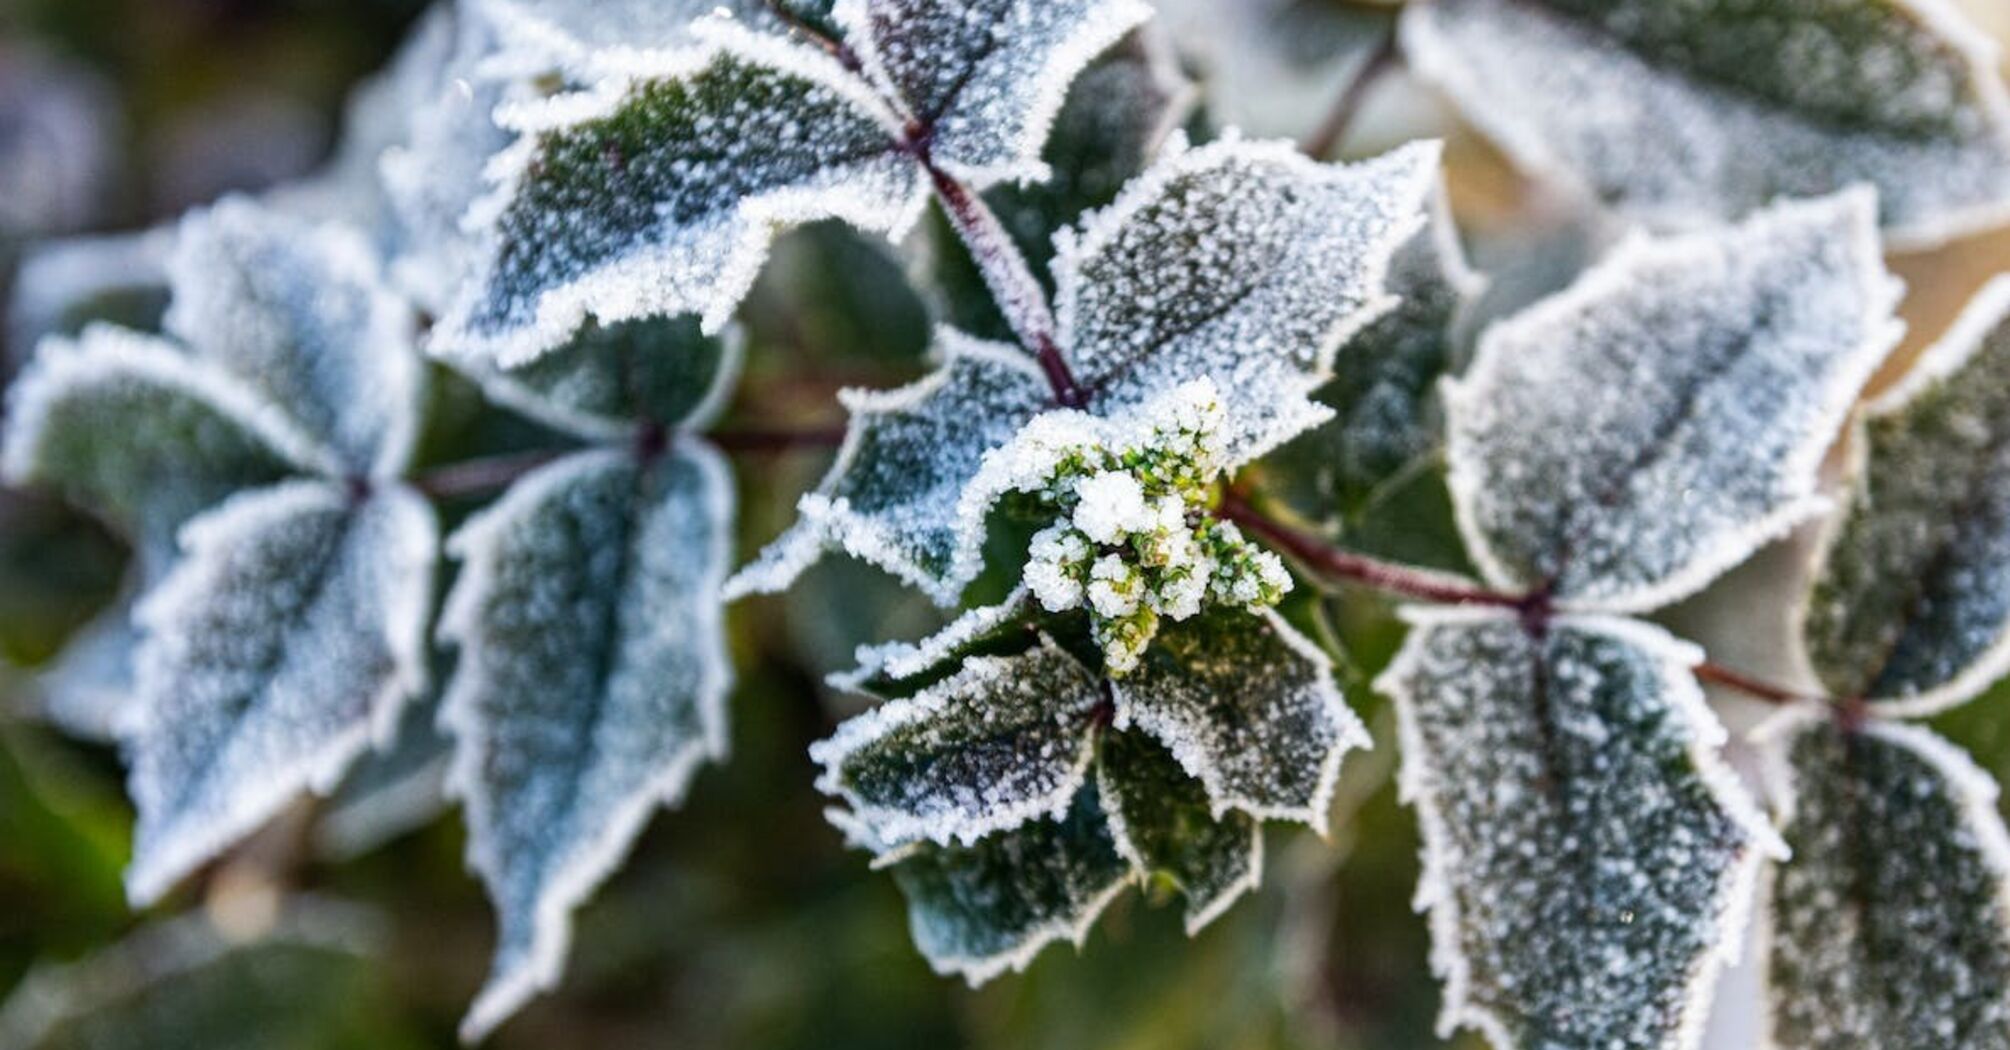 What plants should not be pruned in winter and which ones should: an expert warned gardeners